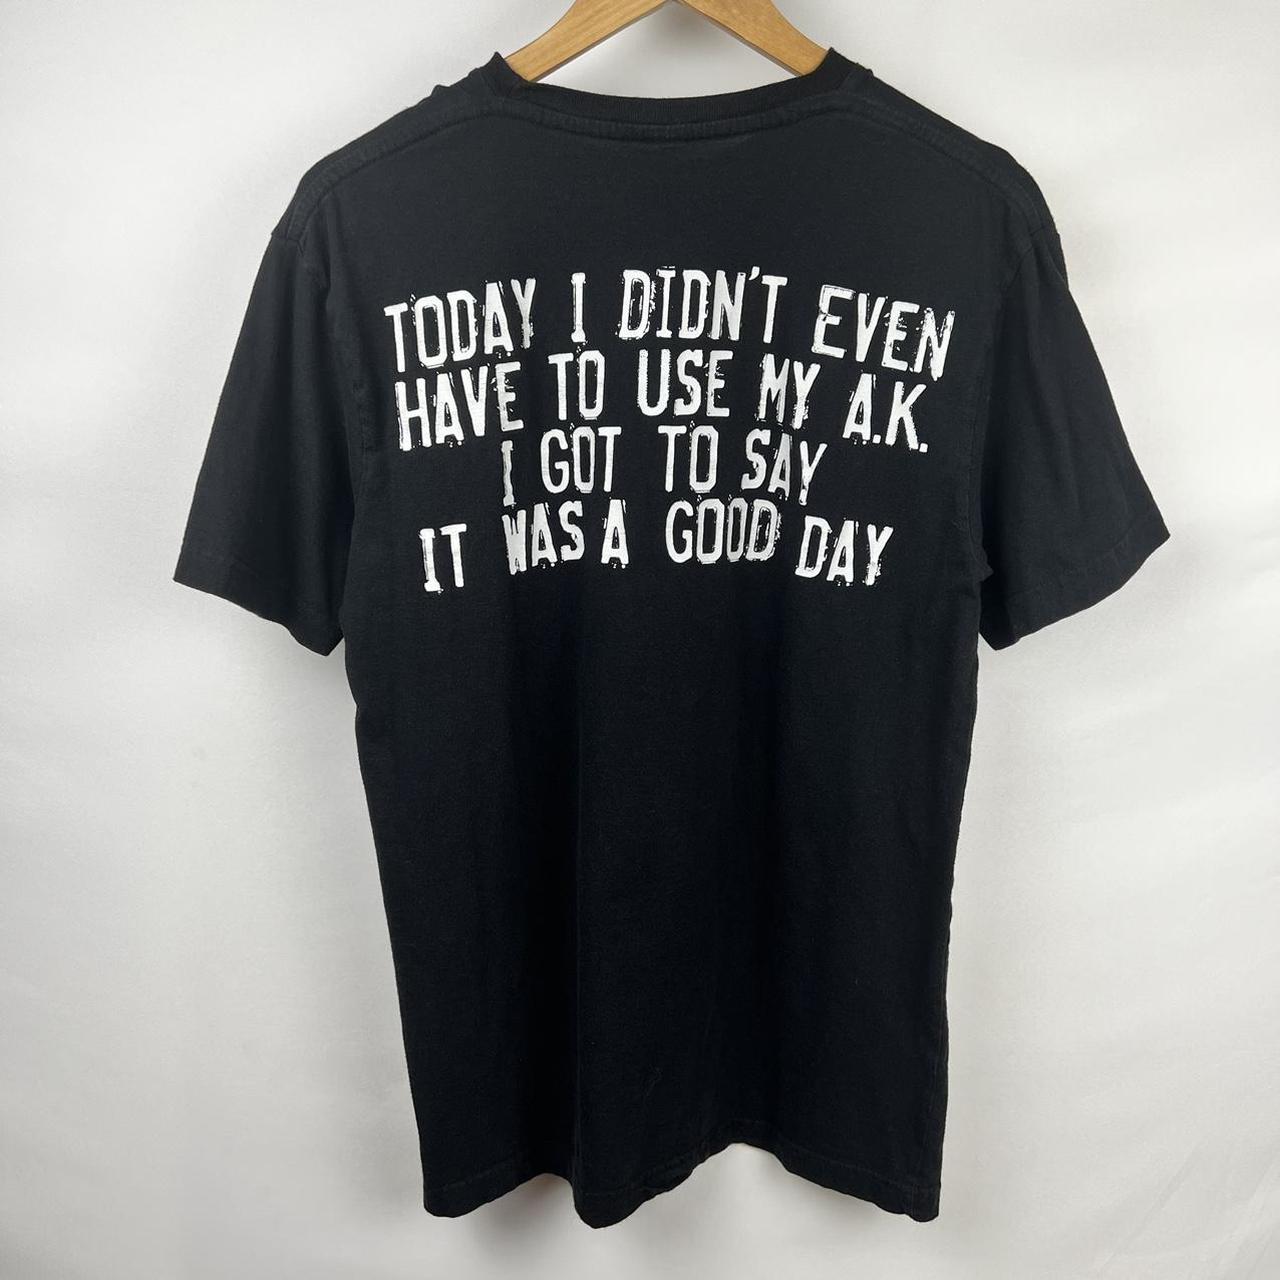 Mini Today Was A Good Day Ice Cube Tee - Black